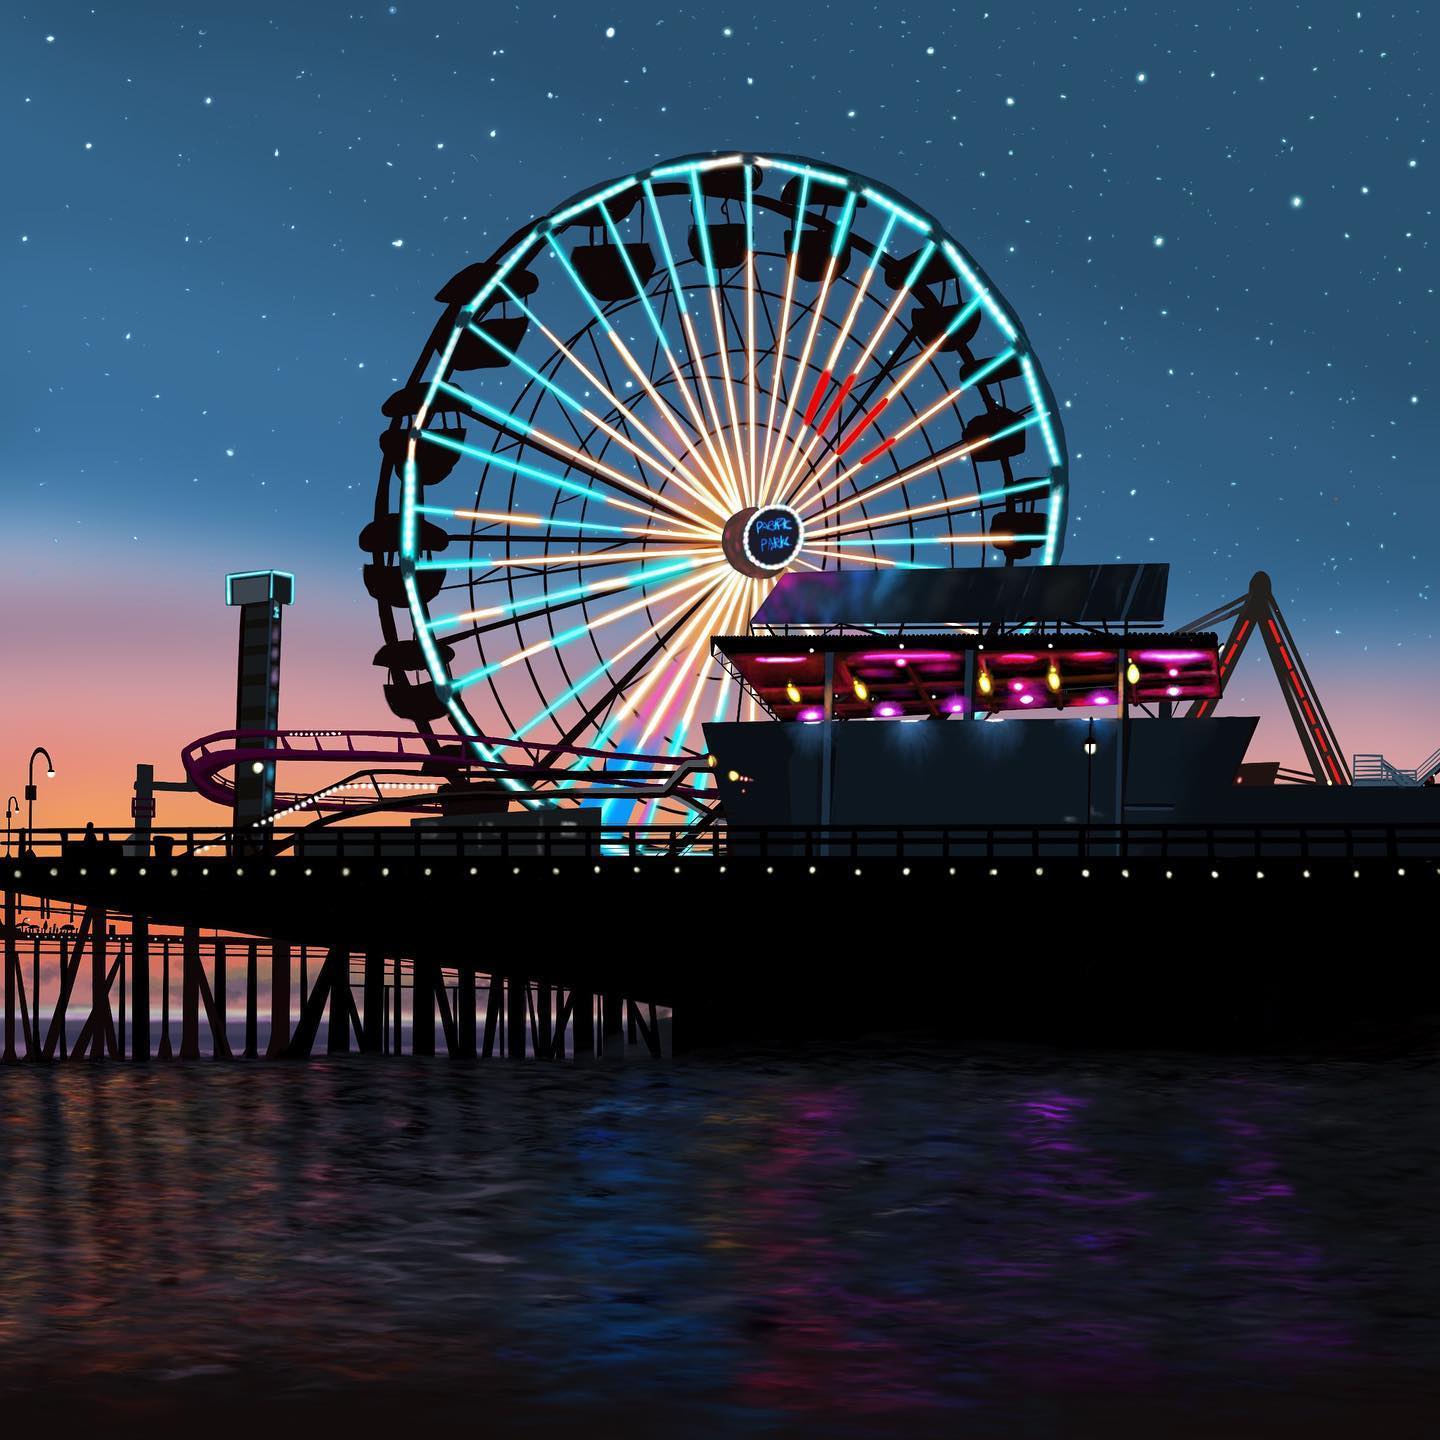 #PhotooftheWeek goes to this digital drawing of the Pacific Wheel! 🎡🖌️  Thank you for sharing this with us @wariann_the_wanderer! Keep up the great work. 📸✨
.
.
.
#santamonica #santamonicapier #pacpark #pacificpark #discoverla #discoverlosangeles #travel #californialove #losangeles #familytime #familyfun #pacificwheel #ferriswheel #procreate #digitalart #dessindujour #artoftheday #california #drawingoftheday #sunsetdrawing #cityscape #cityscapedrawing #artdigital #nightlights #dessindigital